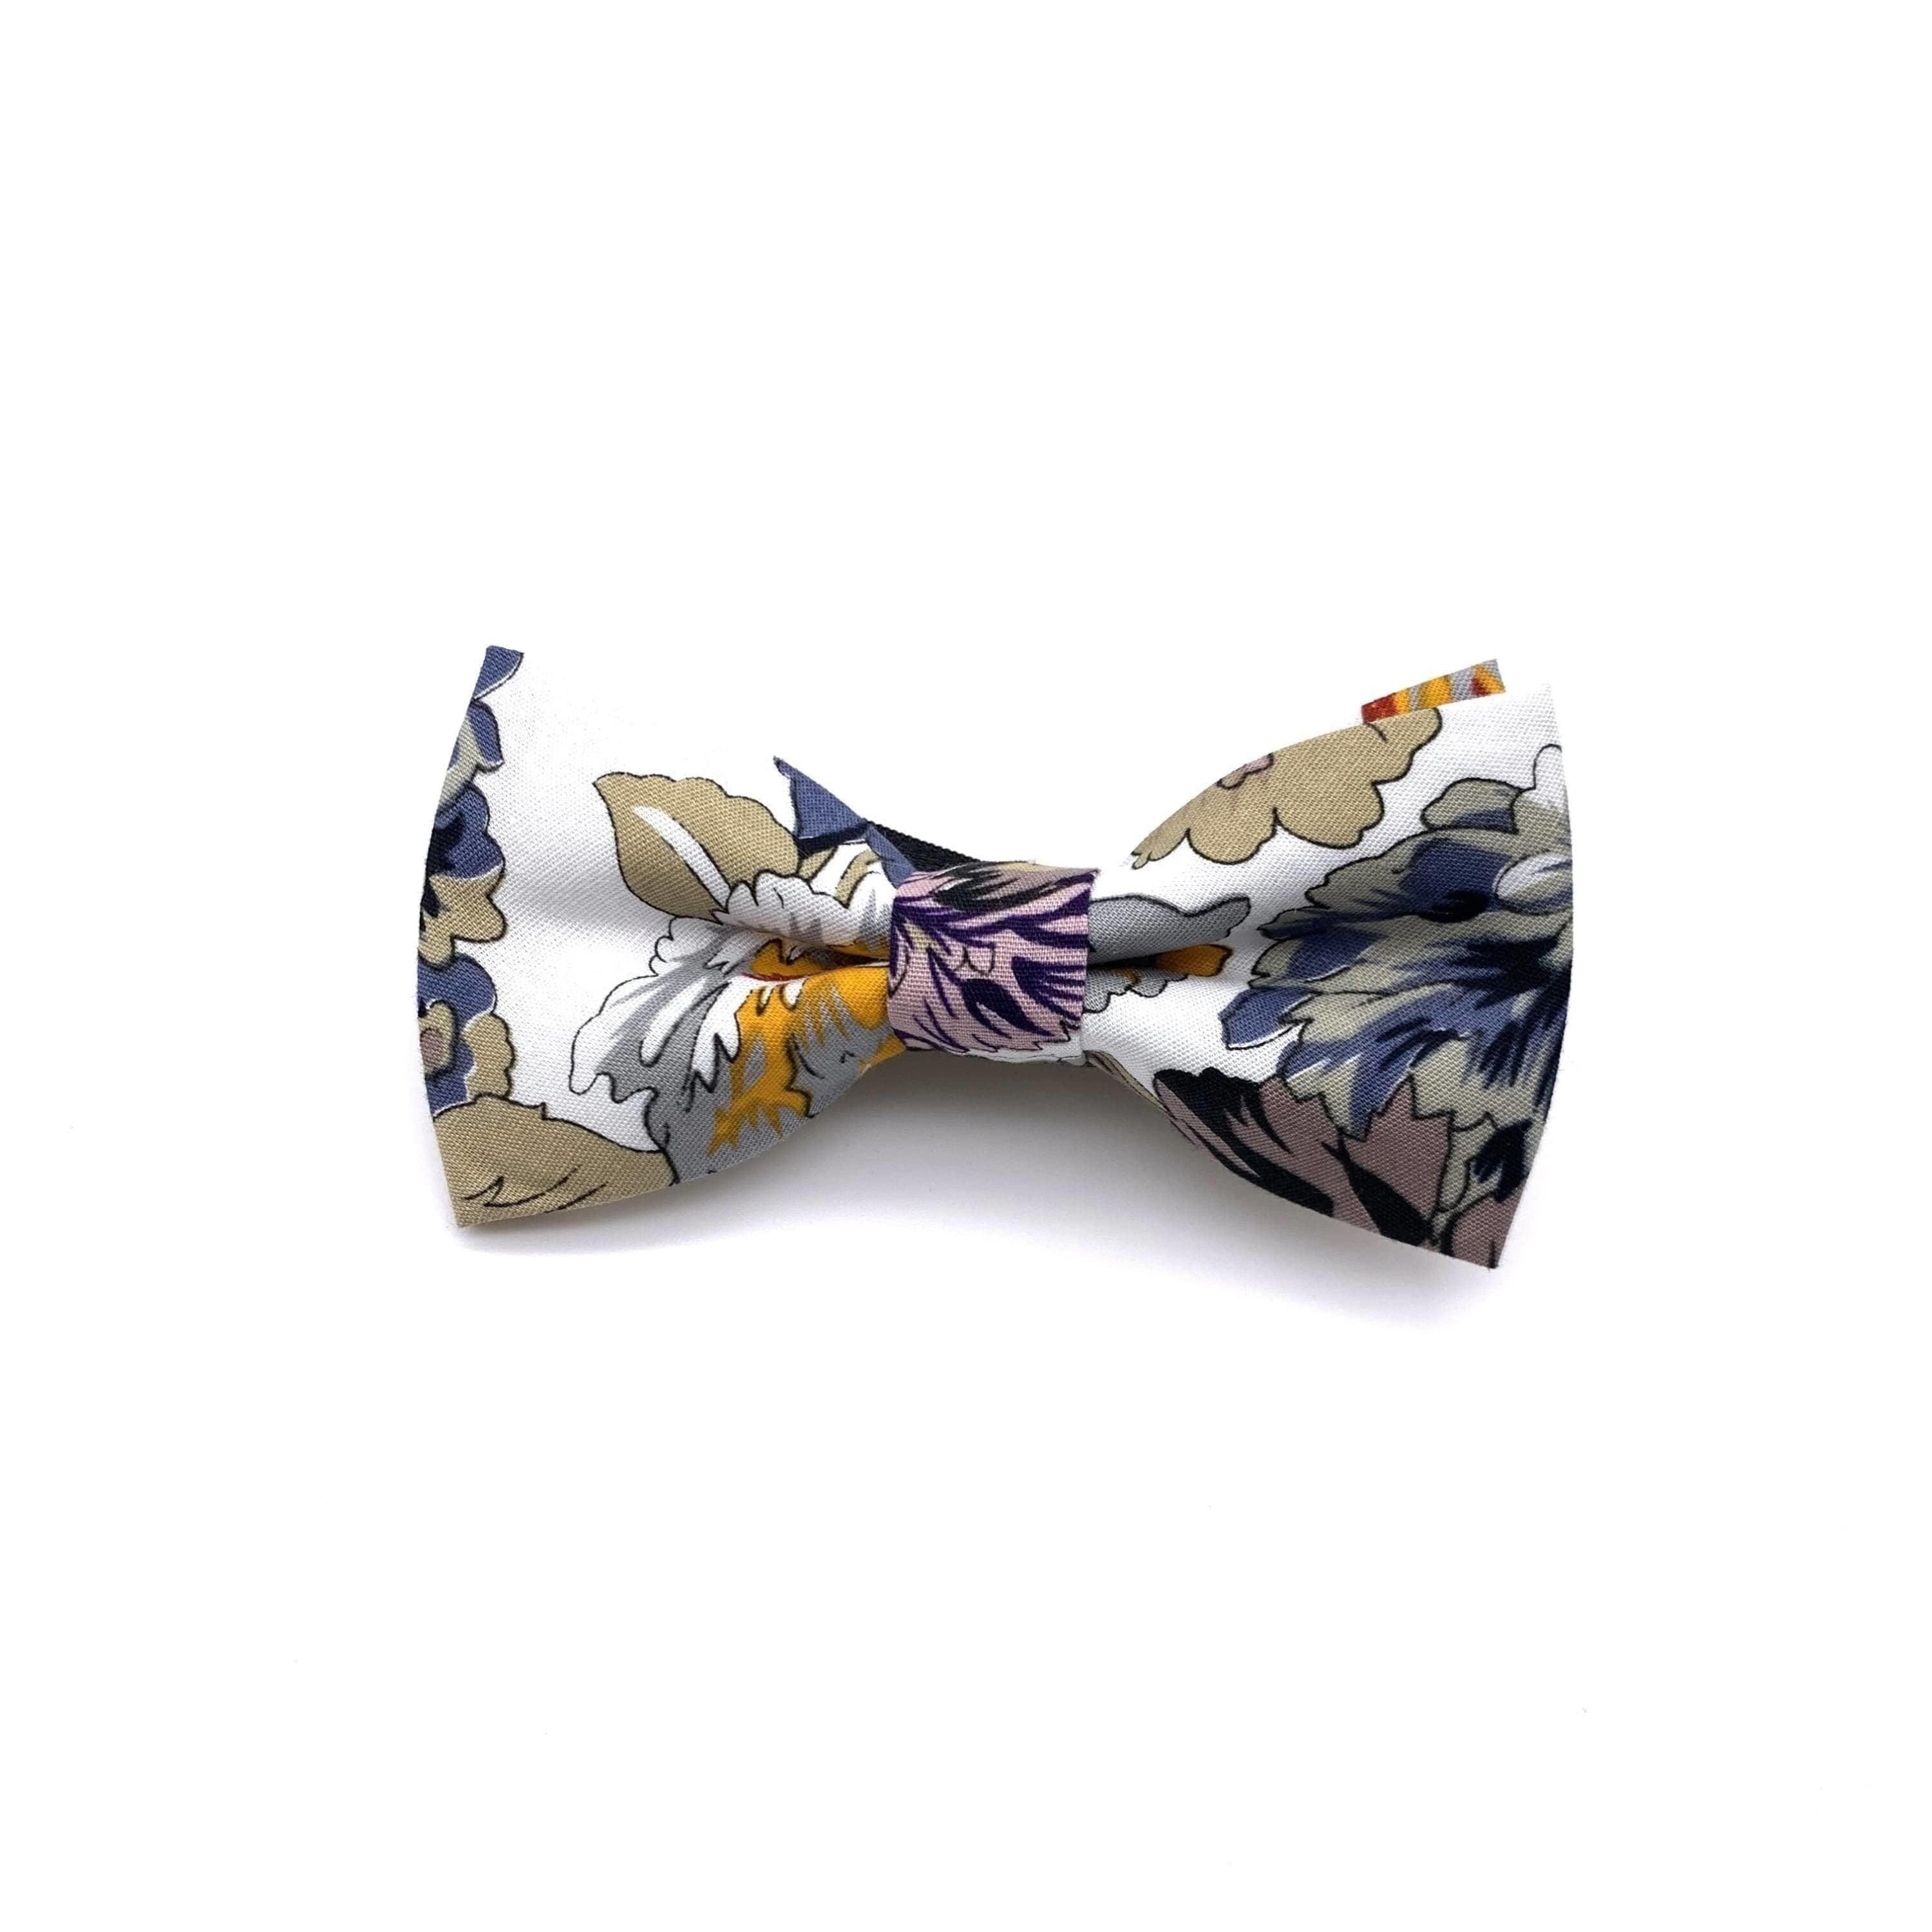 DUKE Kids Floral Pre-Tied Bow Tie-DUKE Kids Floral Pre-Tied Bow Tie Strap is adjustablePre-Tied bowtieBow Tie 10.5 * 6CM Base is White Great for: Weddings styled shoots groomsmen gifts prom formal events-Mytieshop